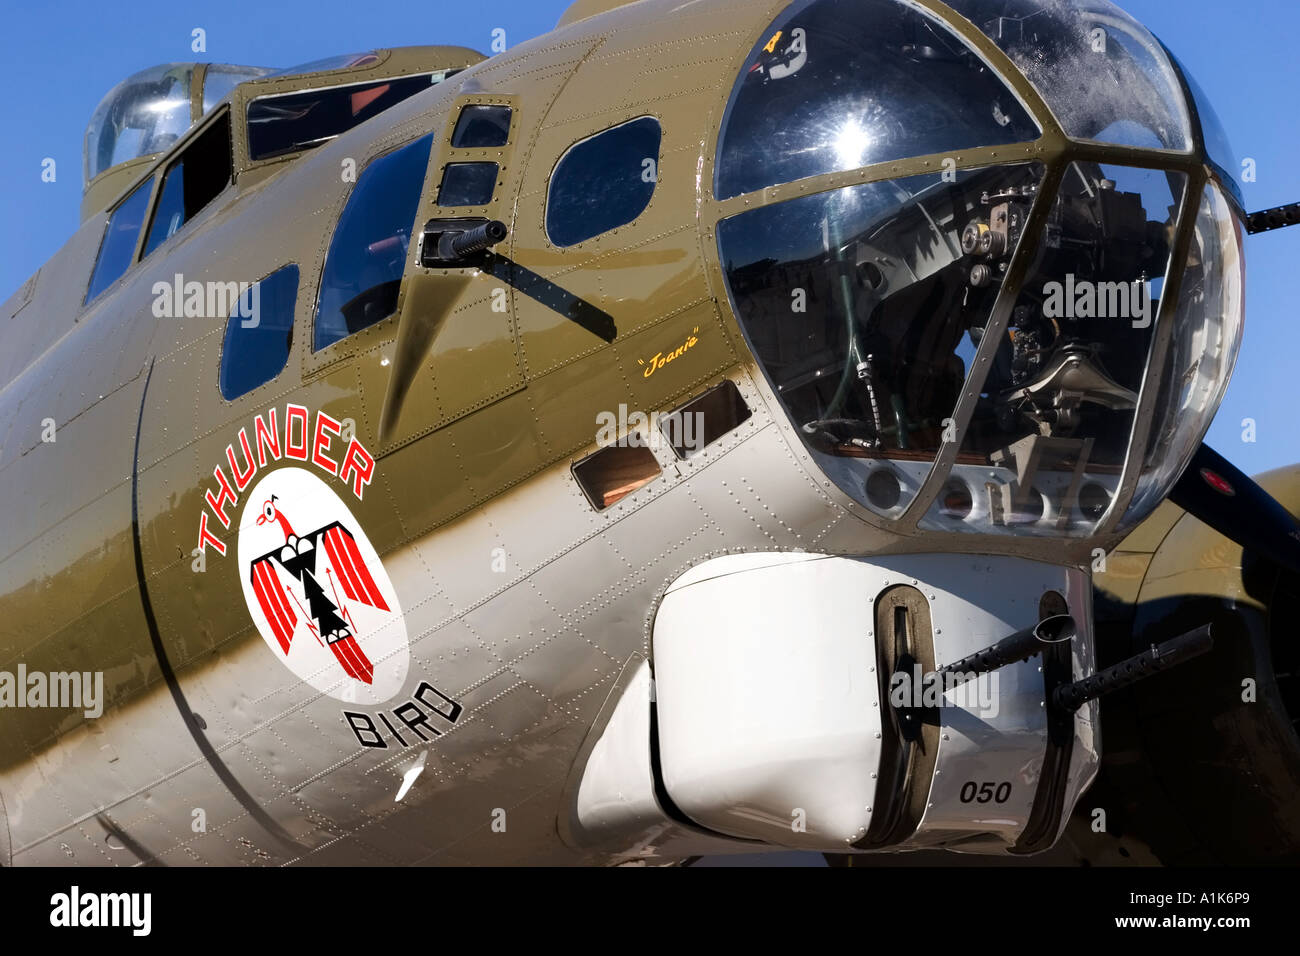 B-17 Flying Fortress nose closeup Stock Photo